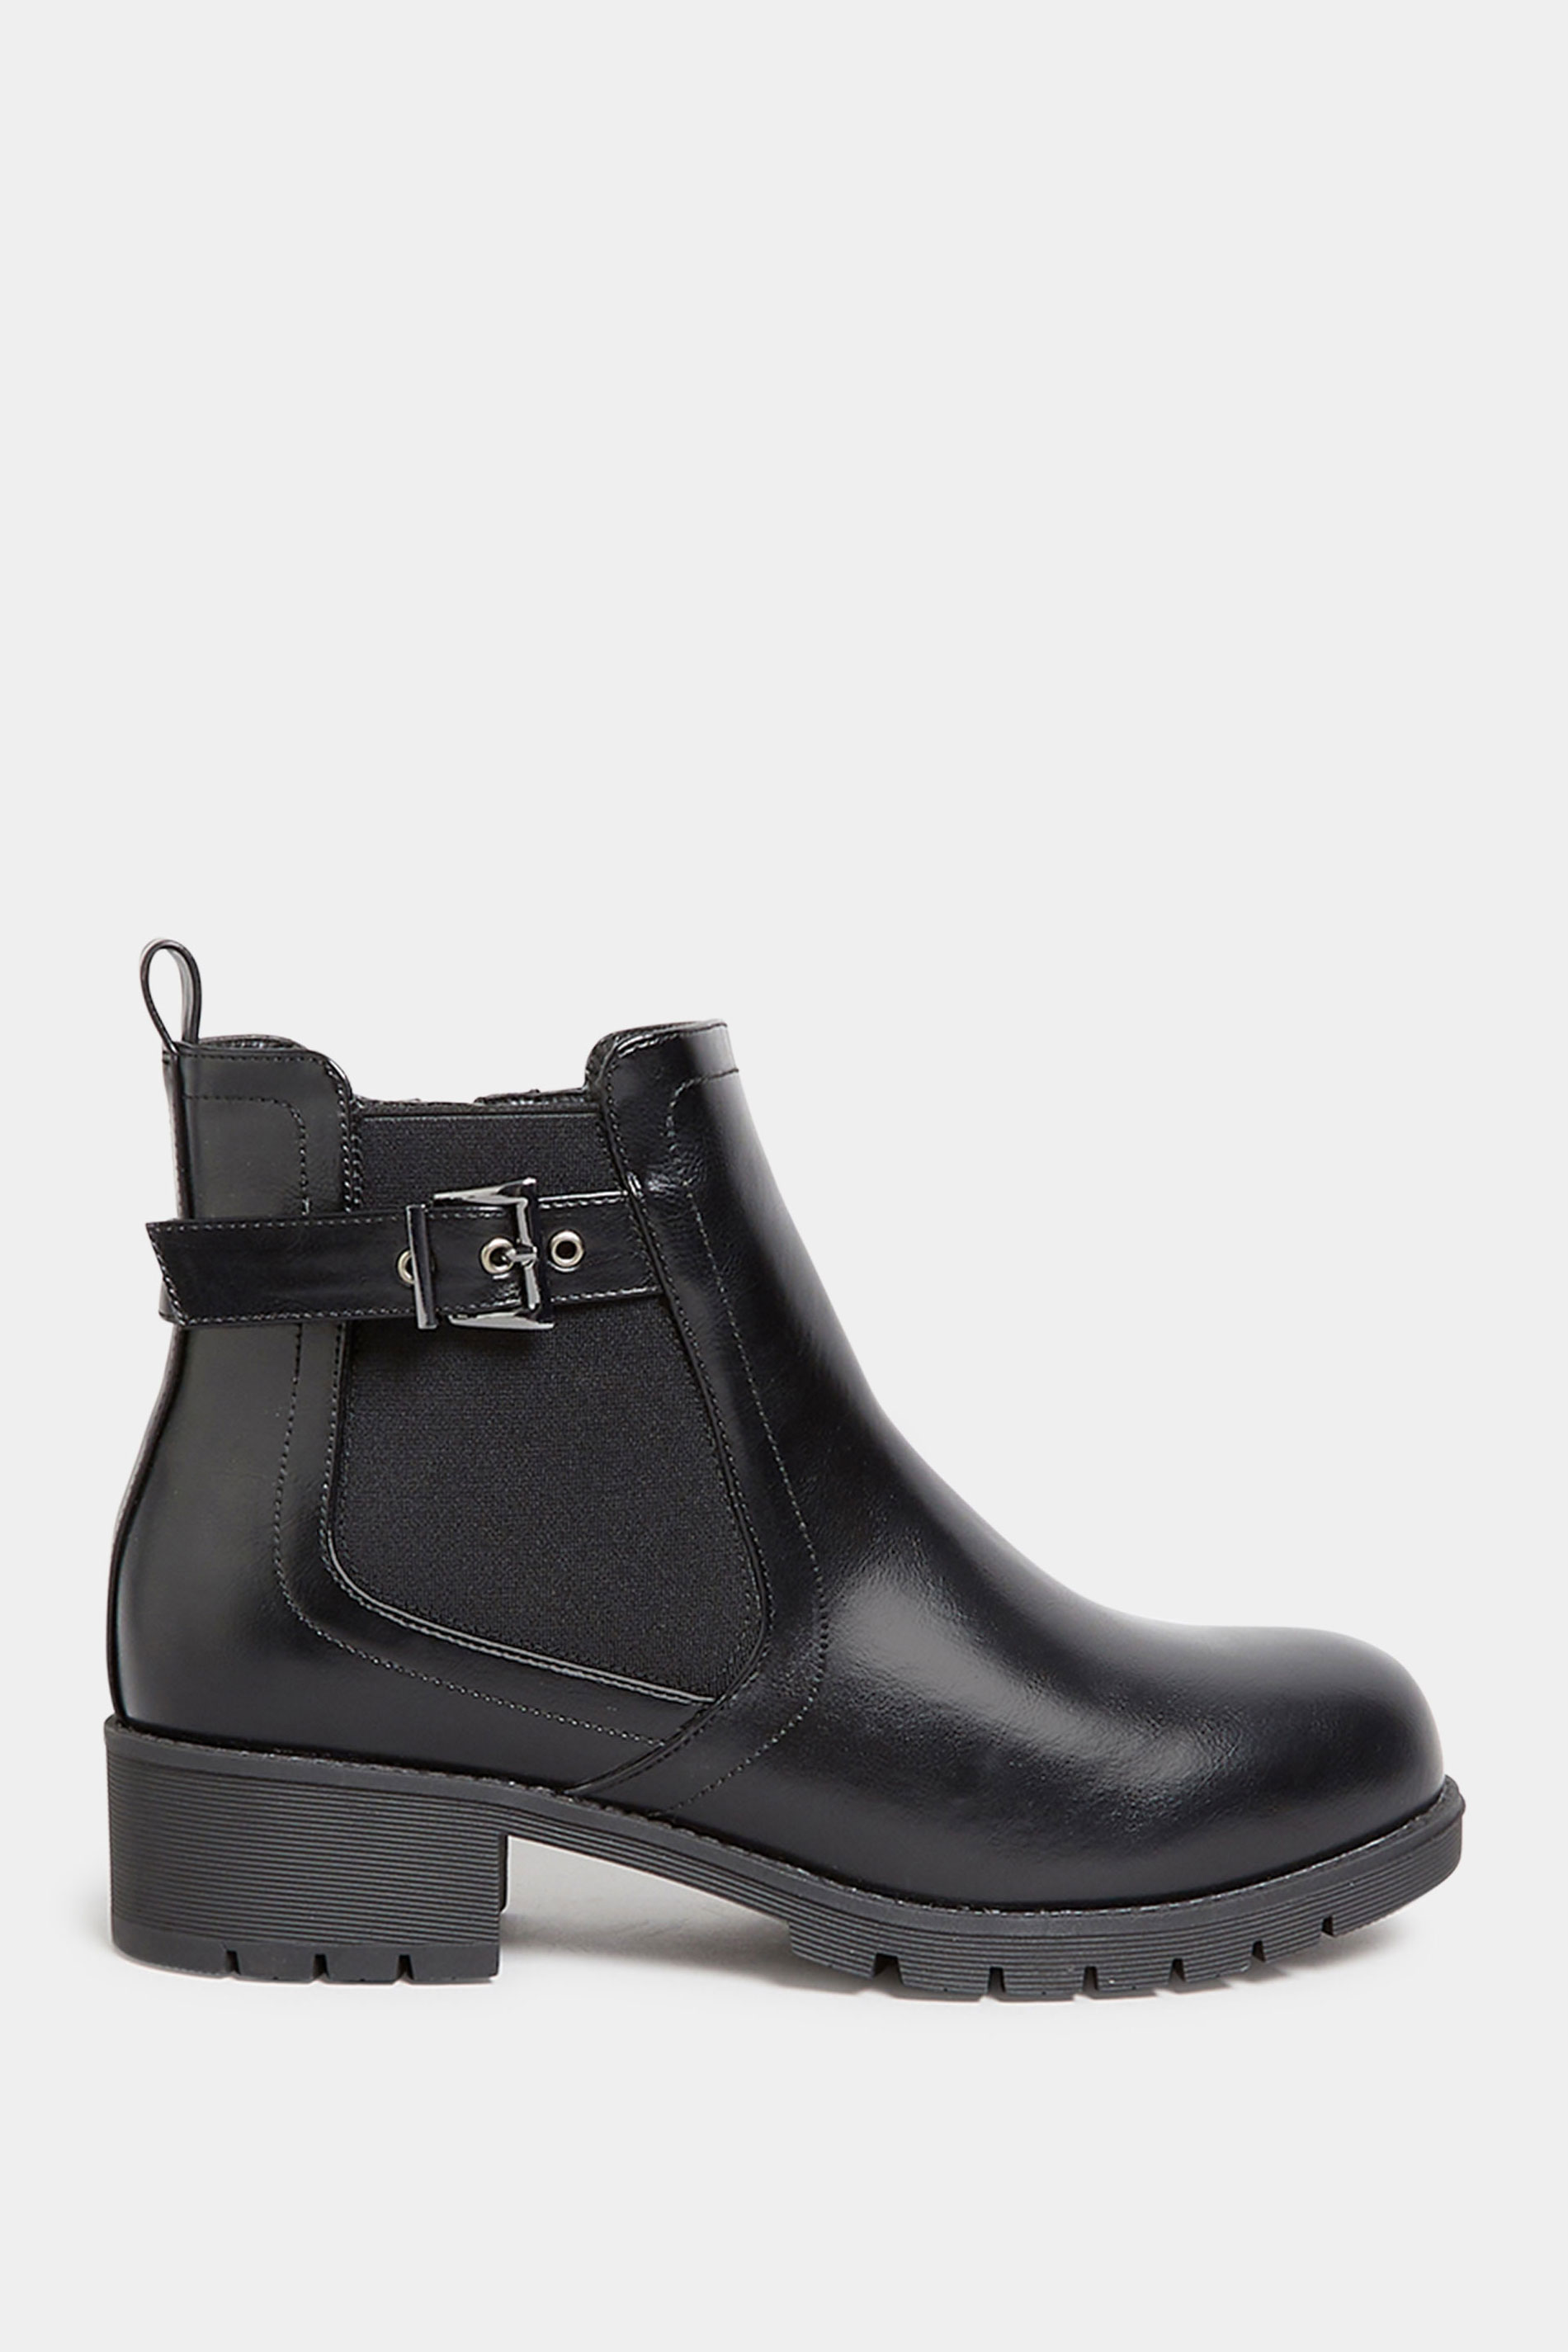 Black Buckle Ankle Boots In Wide E Fit & Extra Wide EEE Fit | Yours Clothing 3